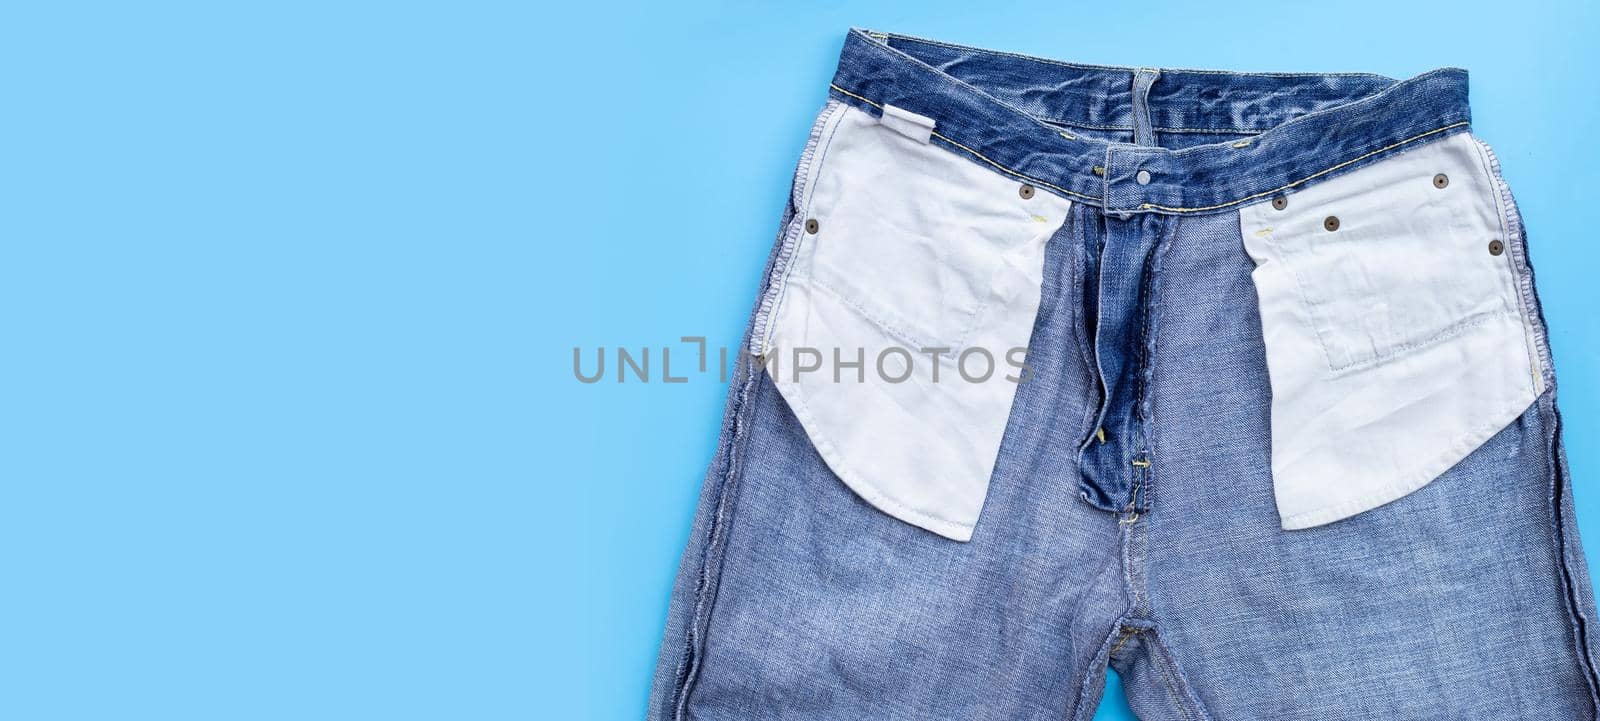 Blue jeans on blue background. by Bowonpat